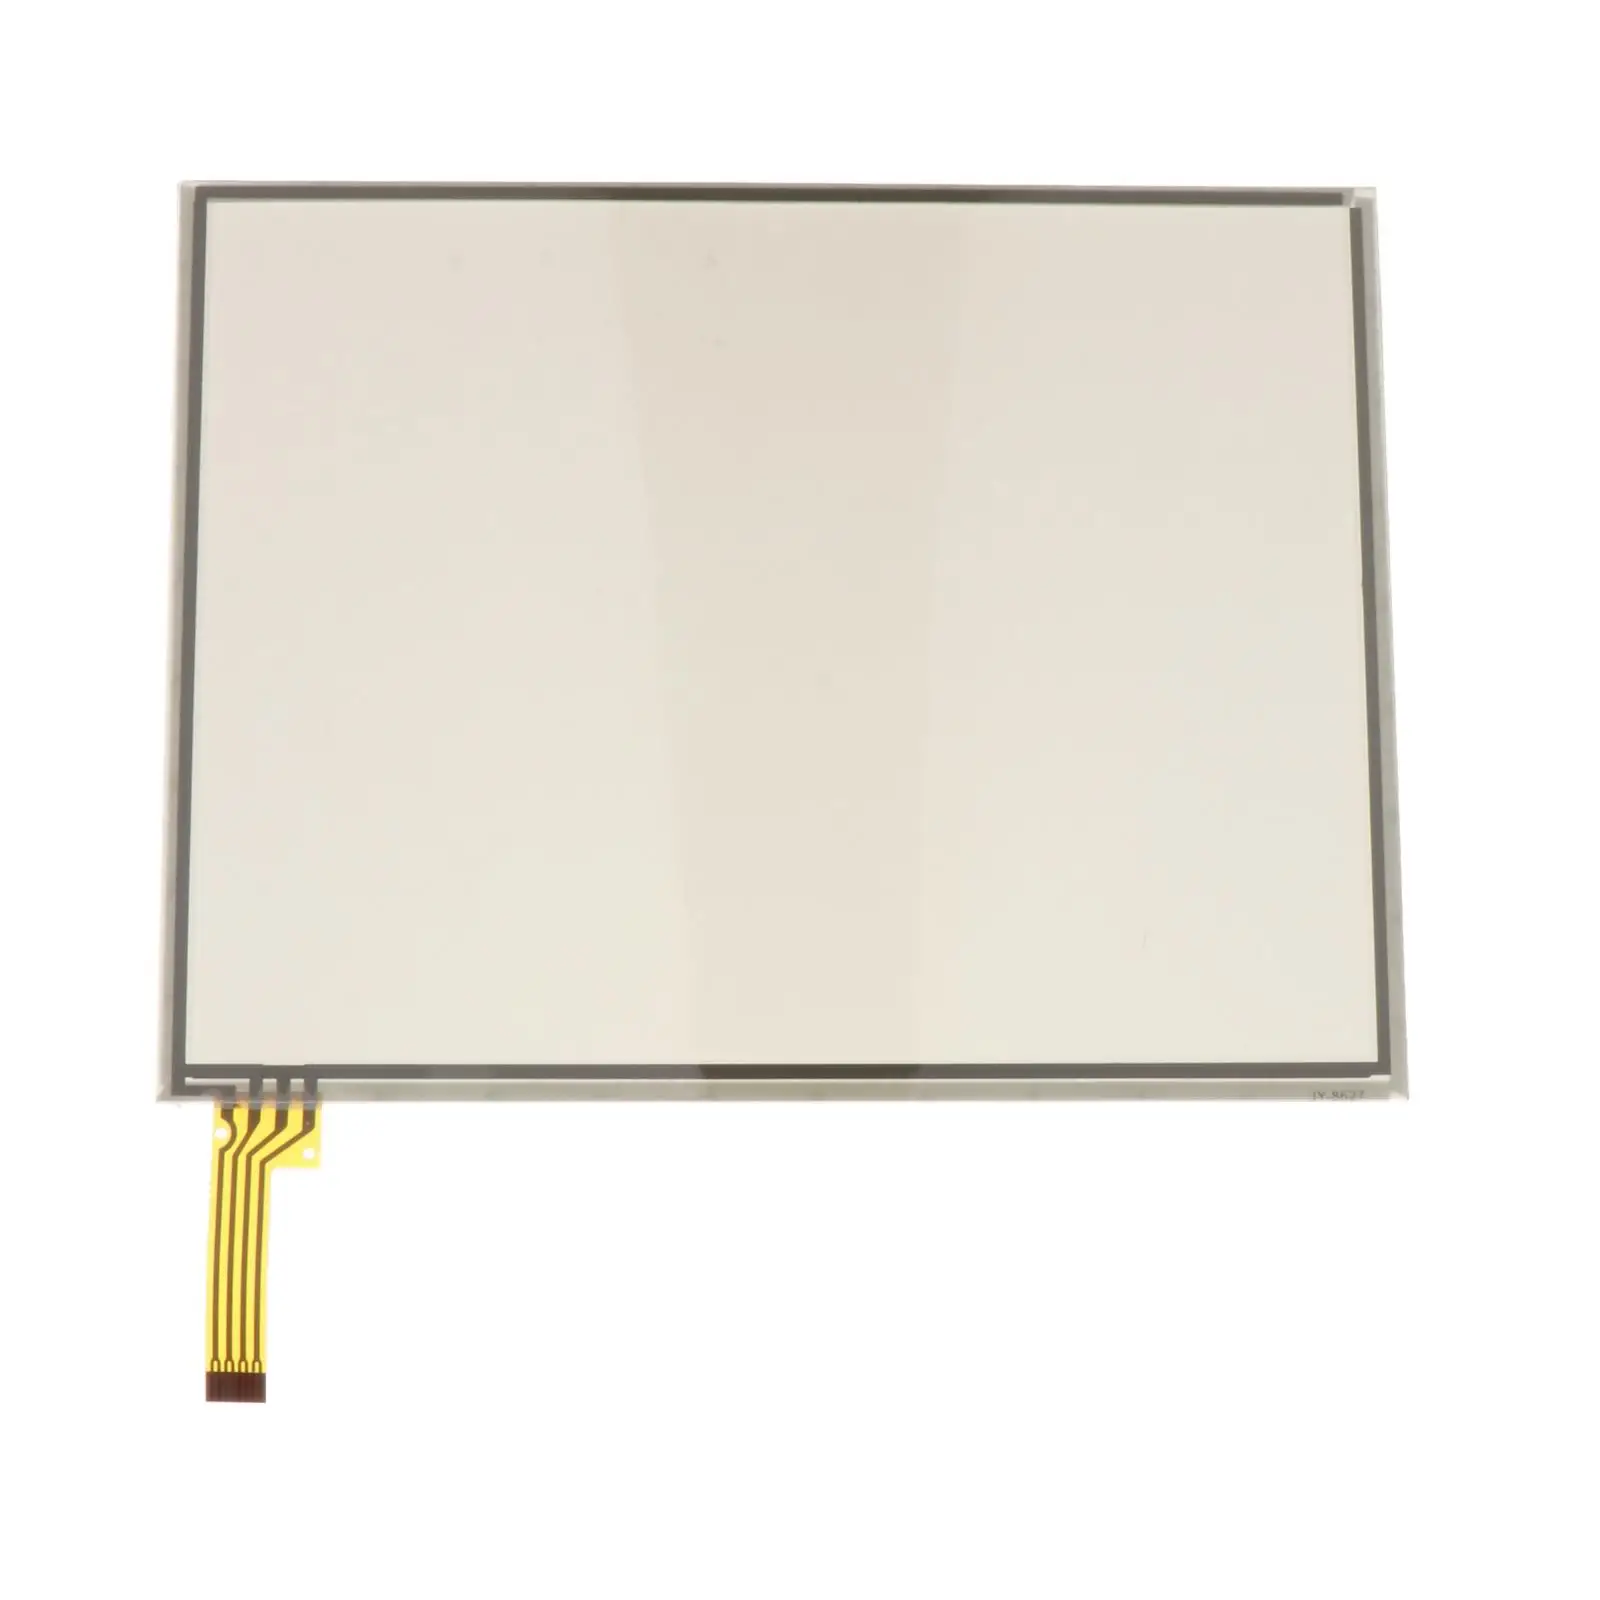 Touch Screen Glass Digitizer For Uconnect 3C 8.4A VP3 8.4AN VP4 Radio 8.4